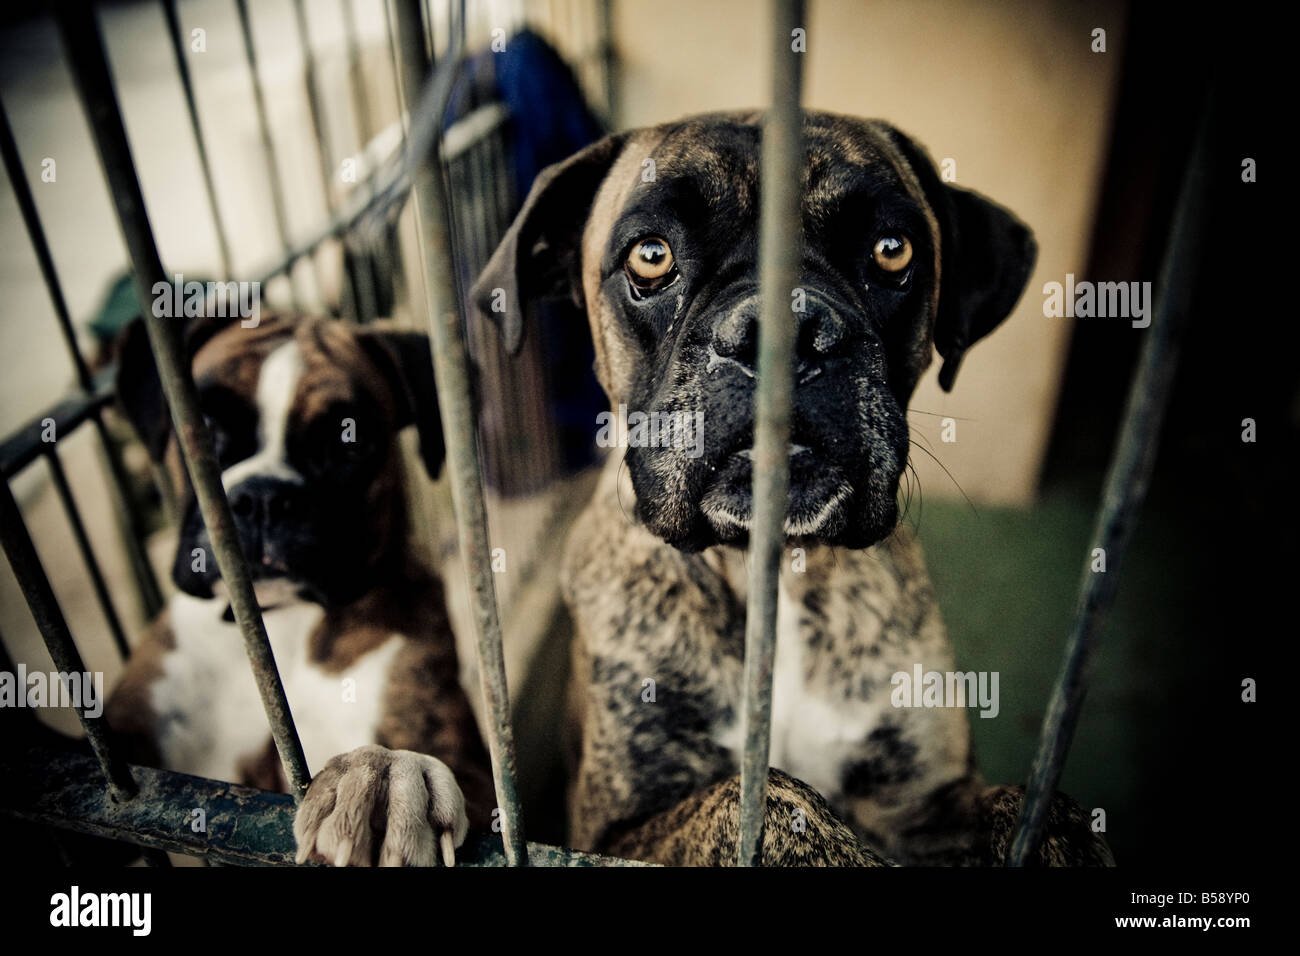 Two boxers from an animal shelter. Stock Photo